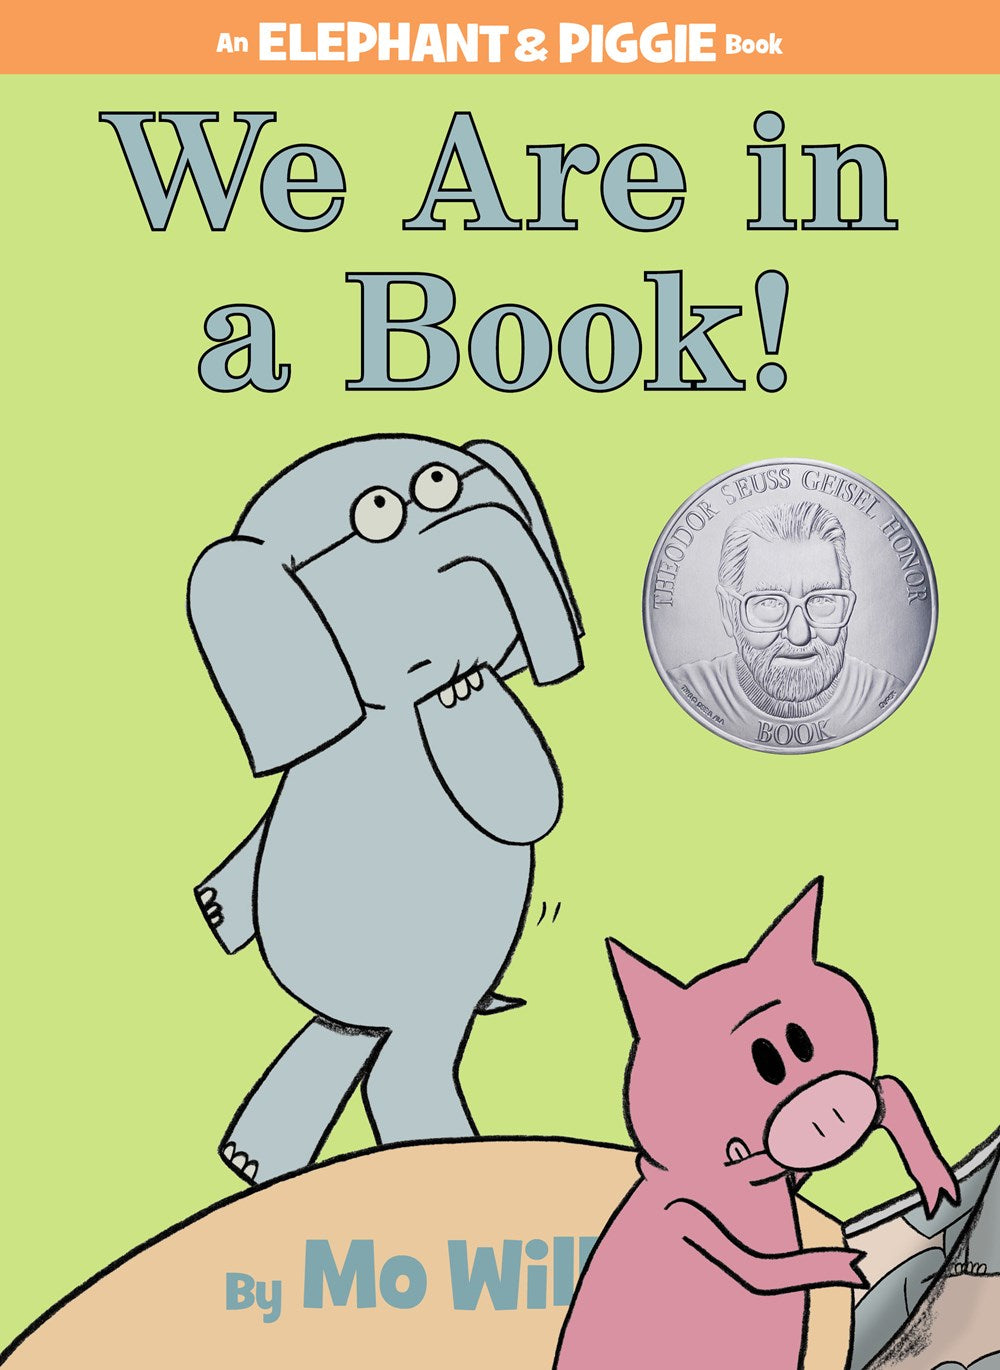 We Are In a Book! by Mo Willems (An Elephant & Piggie Book)